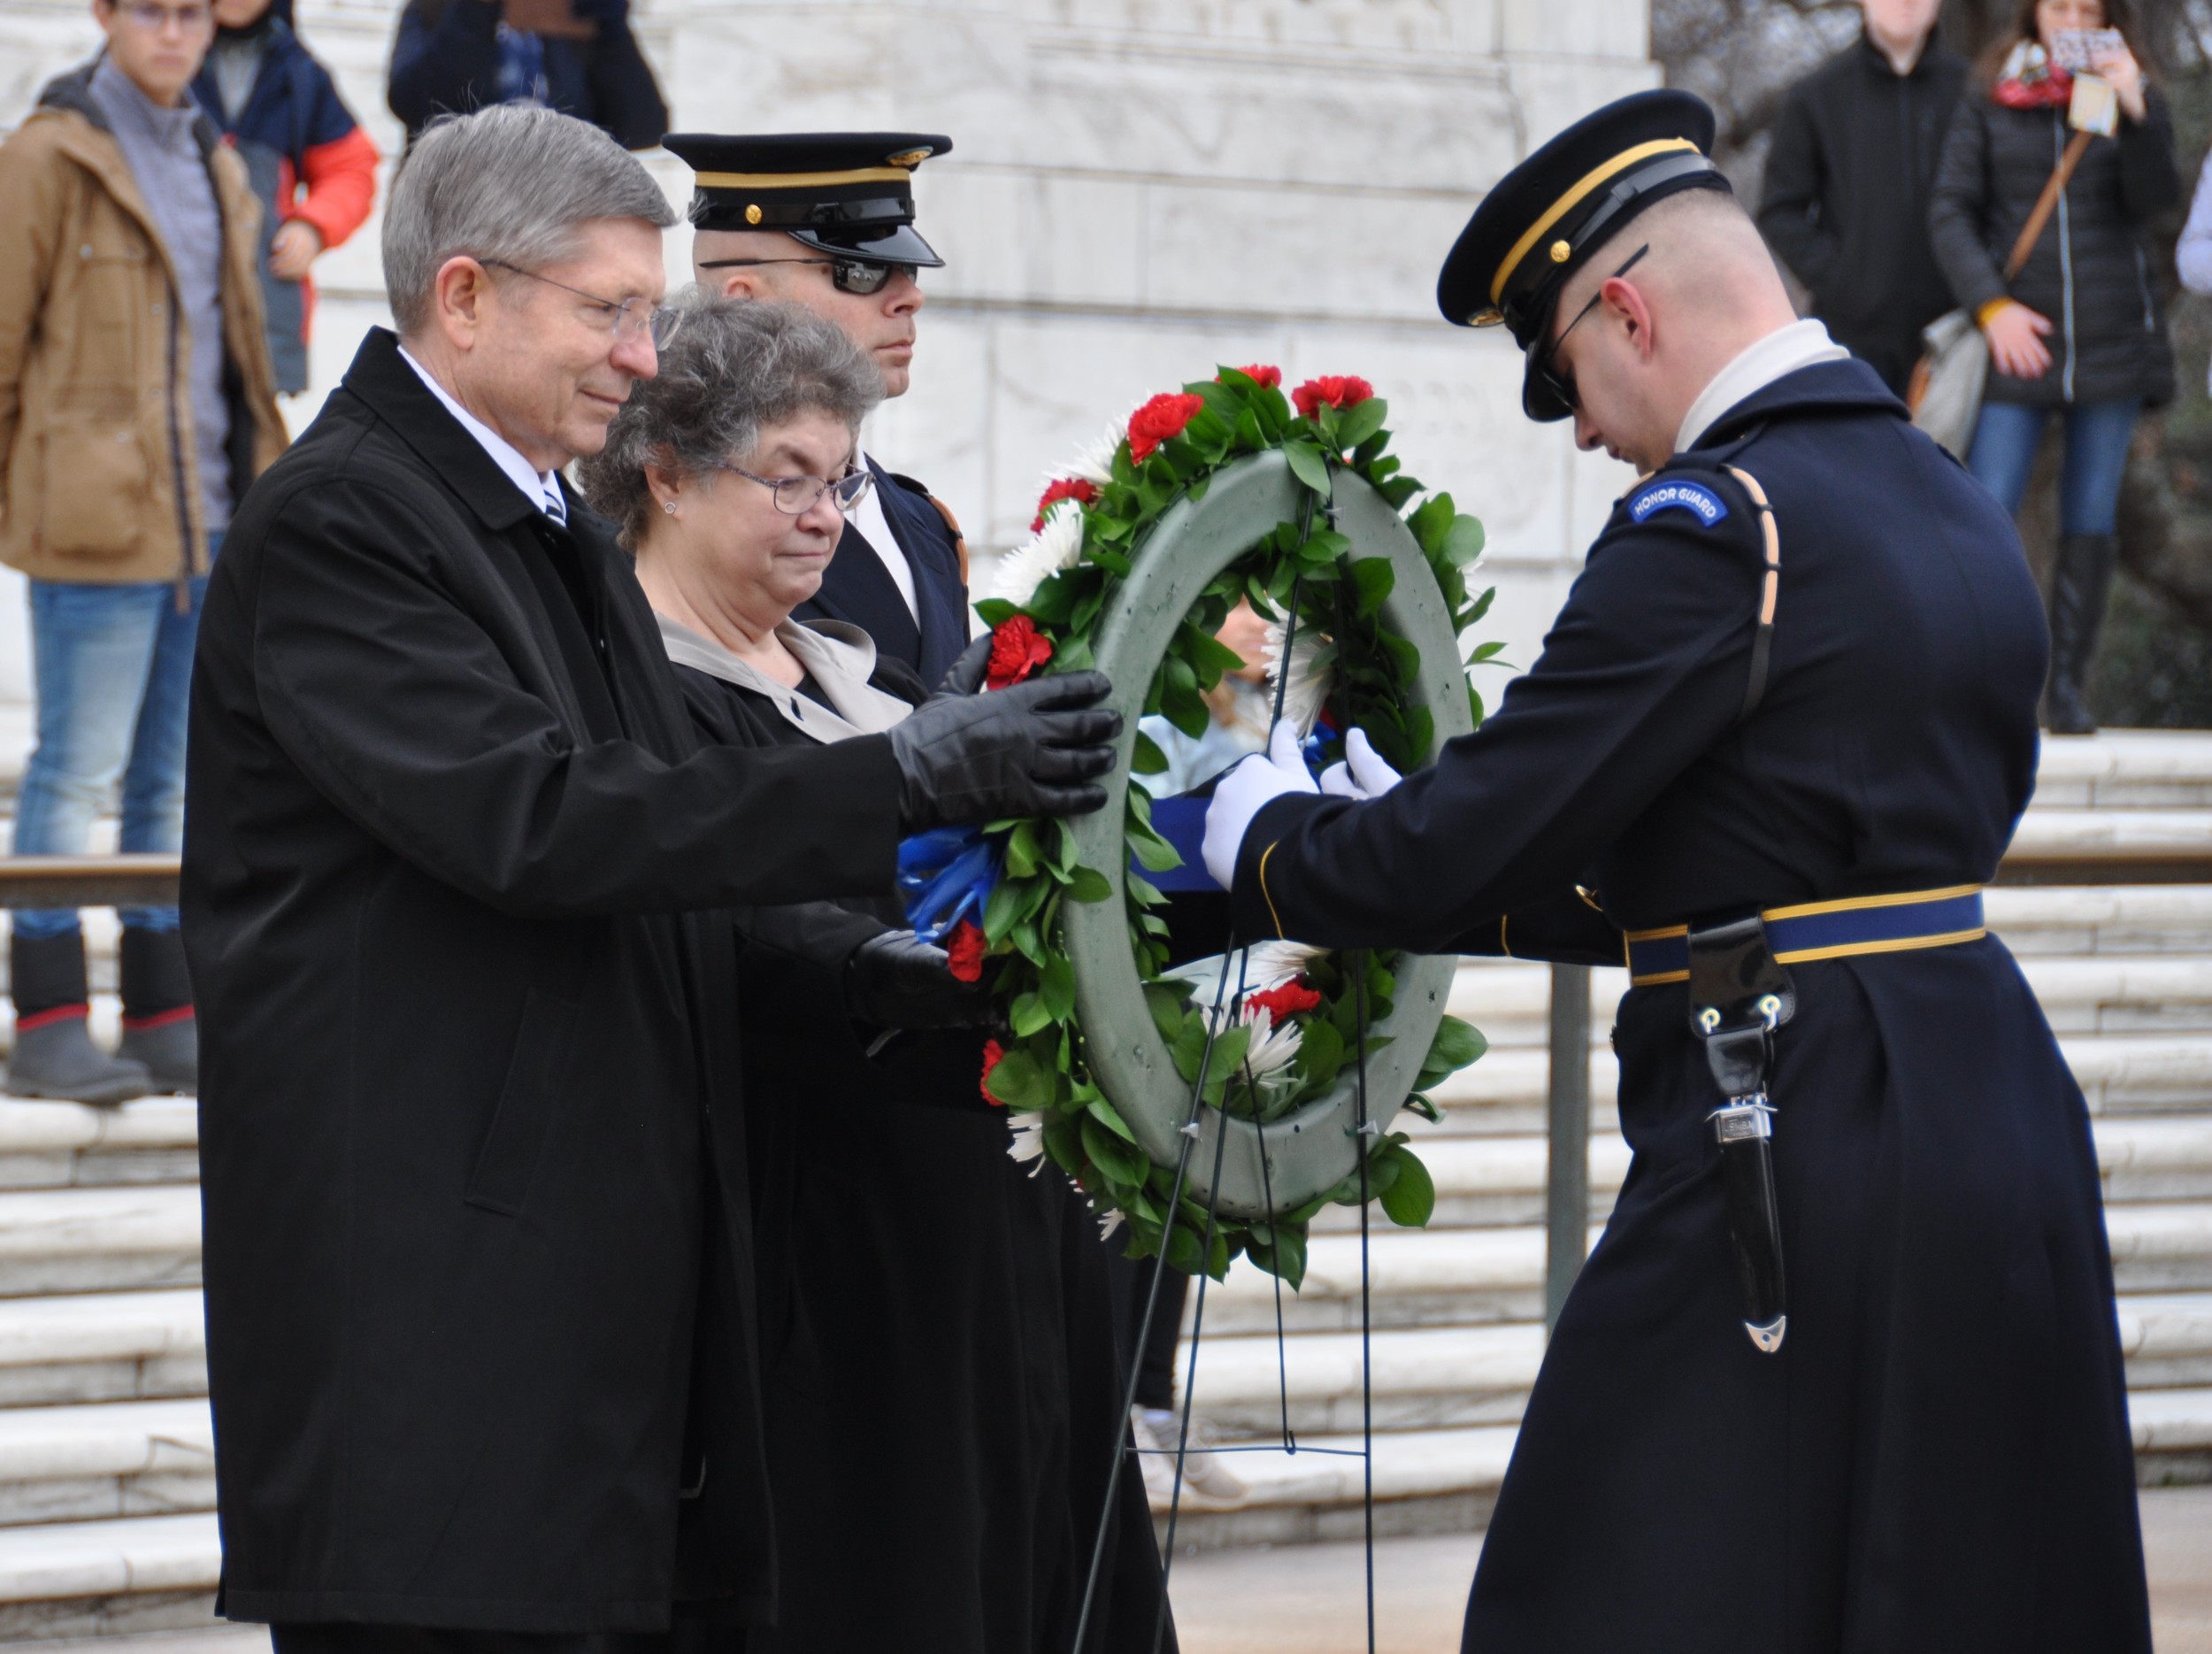 On his last day as an Army Senior Executive, Rickey Smith and his wife Margaret participated in a Wreath Laying Ceremony at the tomb of the Unknowns in Arlington National Cemetery.